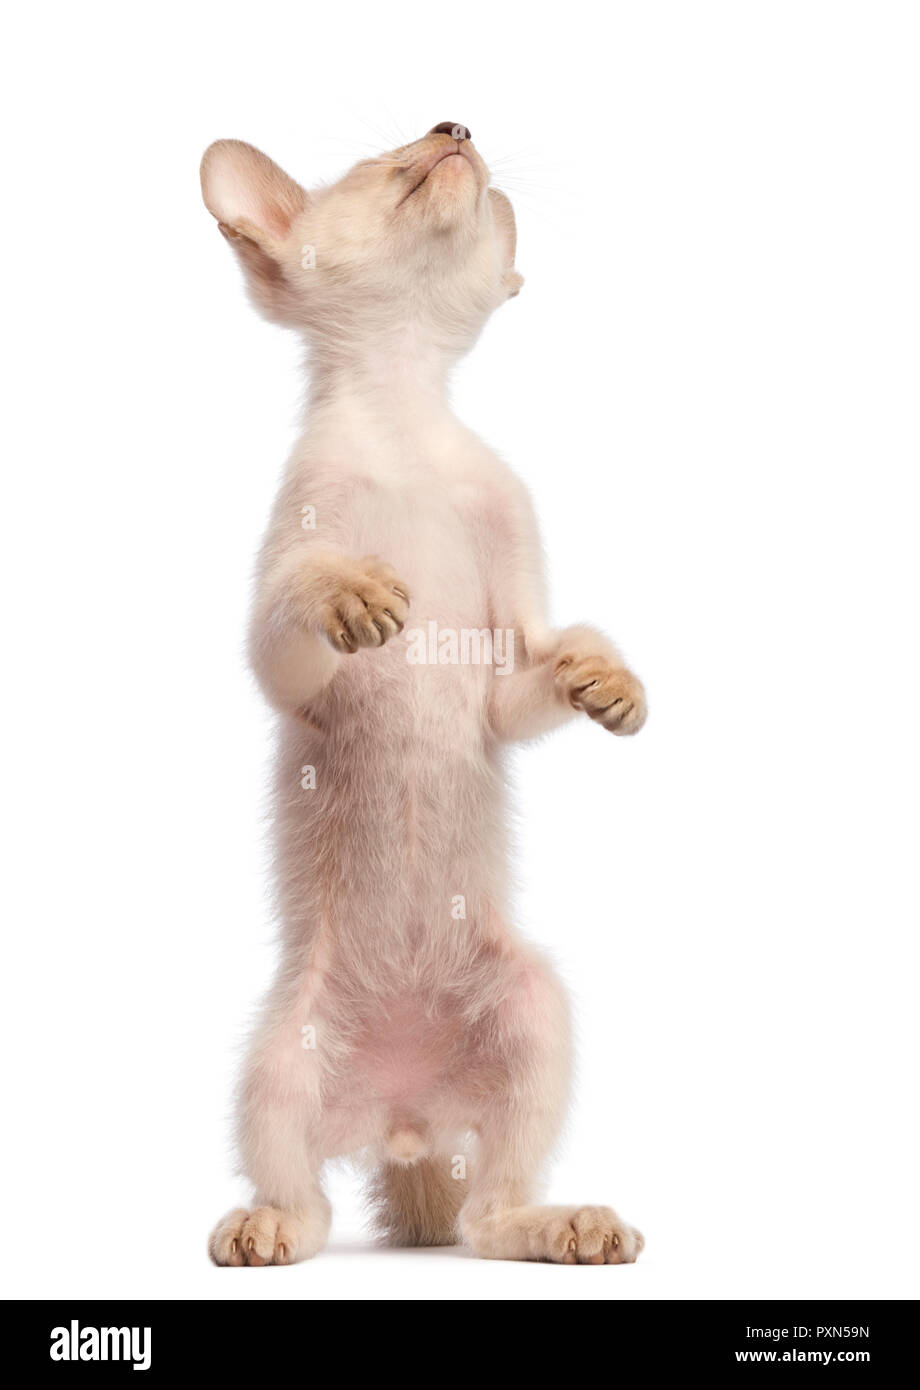 Oriental Shorthair kitten, 9 weeks old, standing on hind legs and looking up against white background Stock Photo